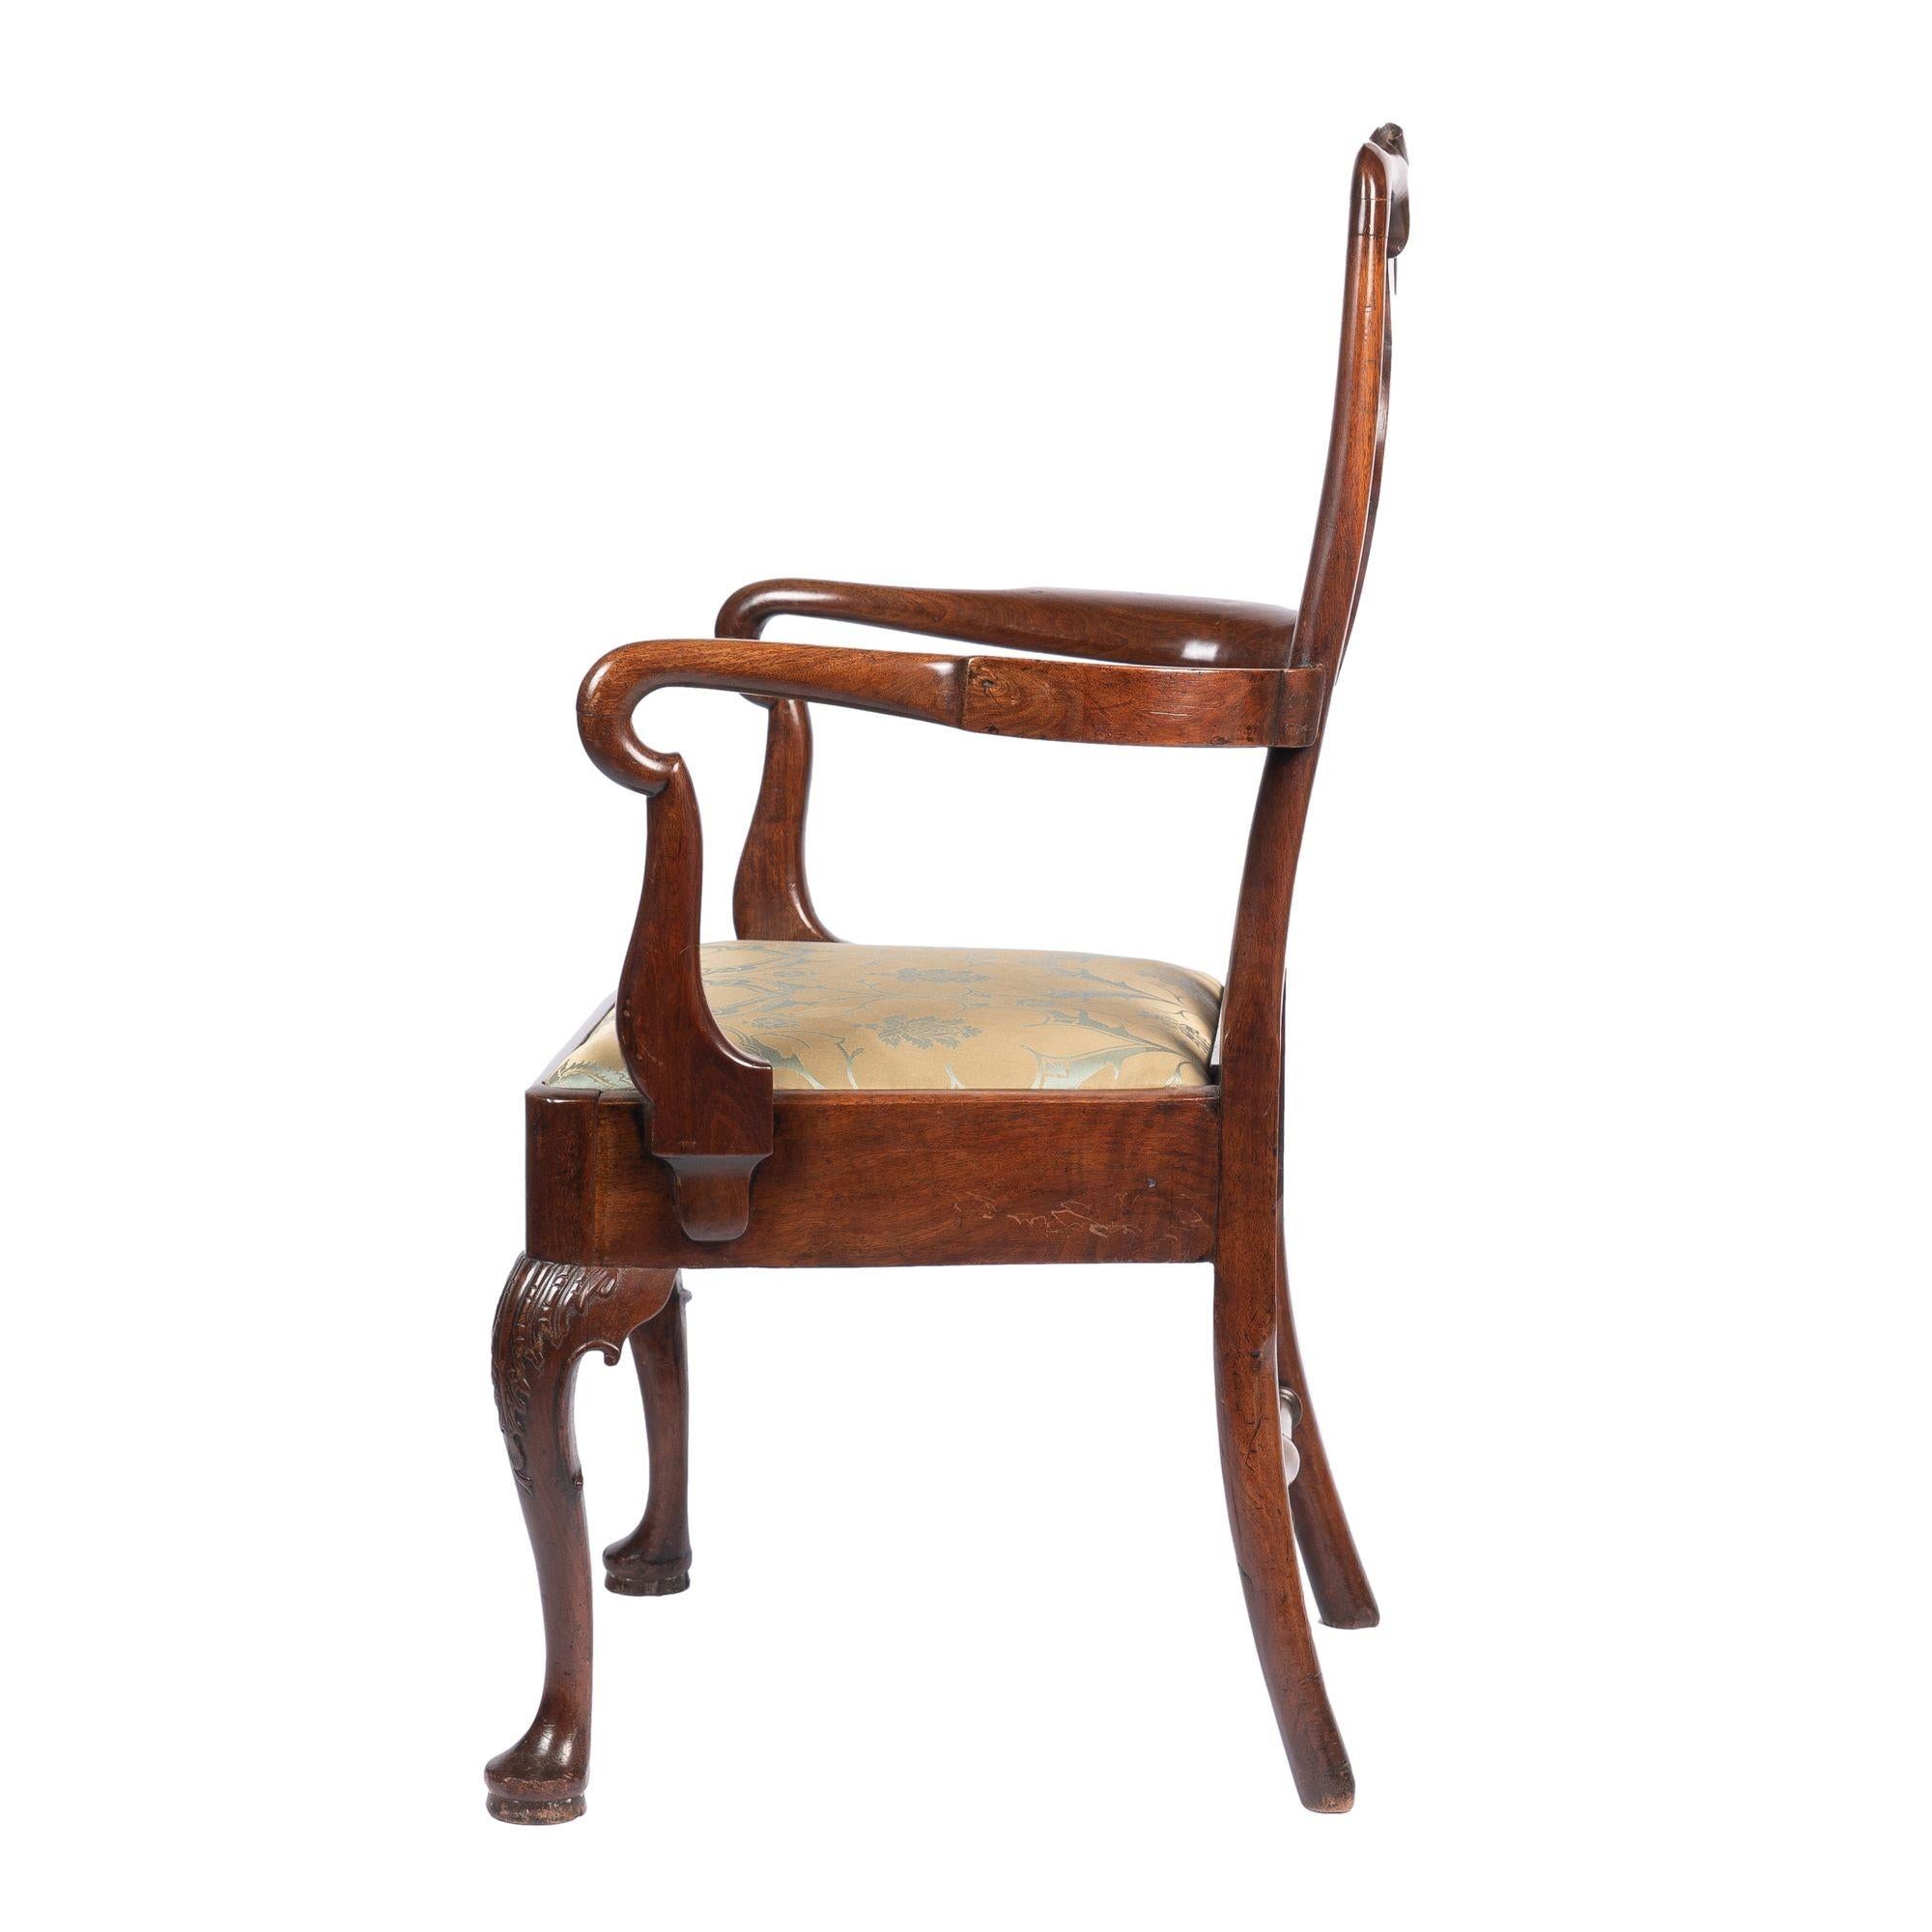 George I English Georgian Mahogany Armchair with Upholstered Slip Seat, c. 1720 For Sale